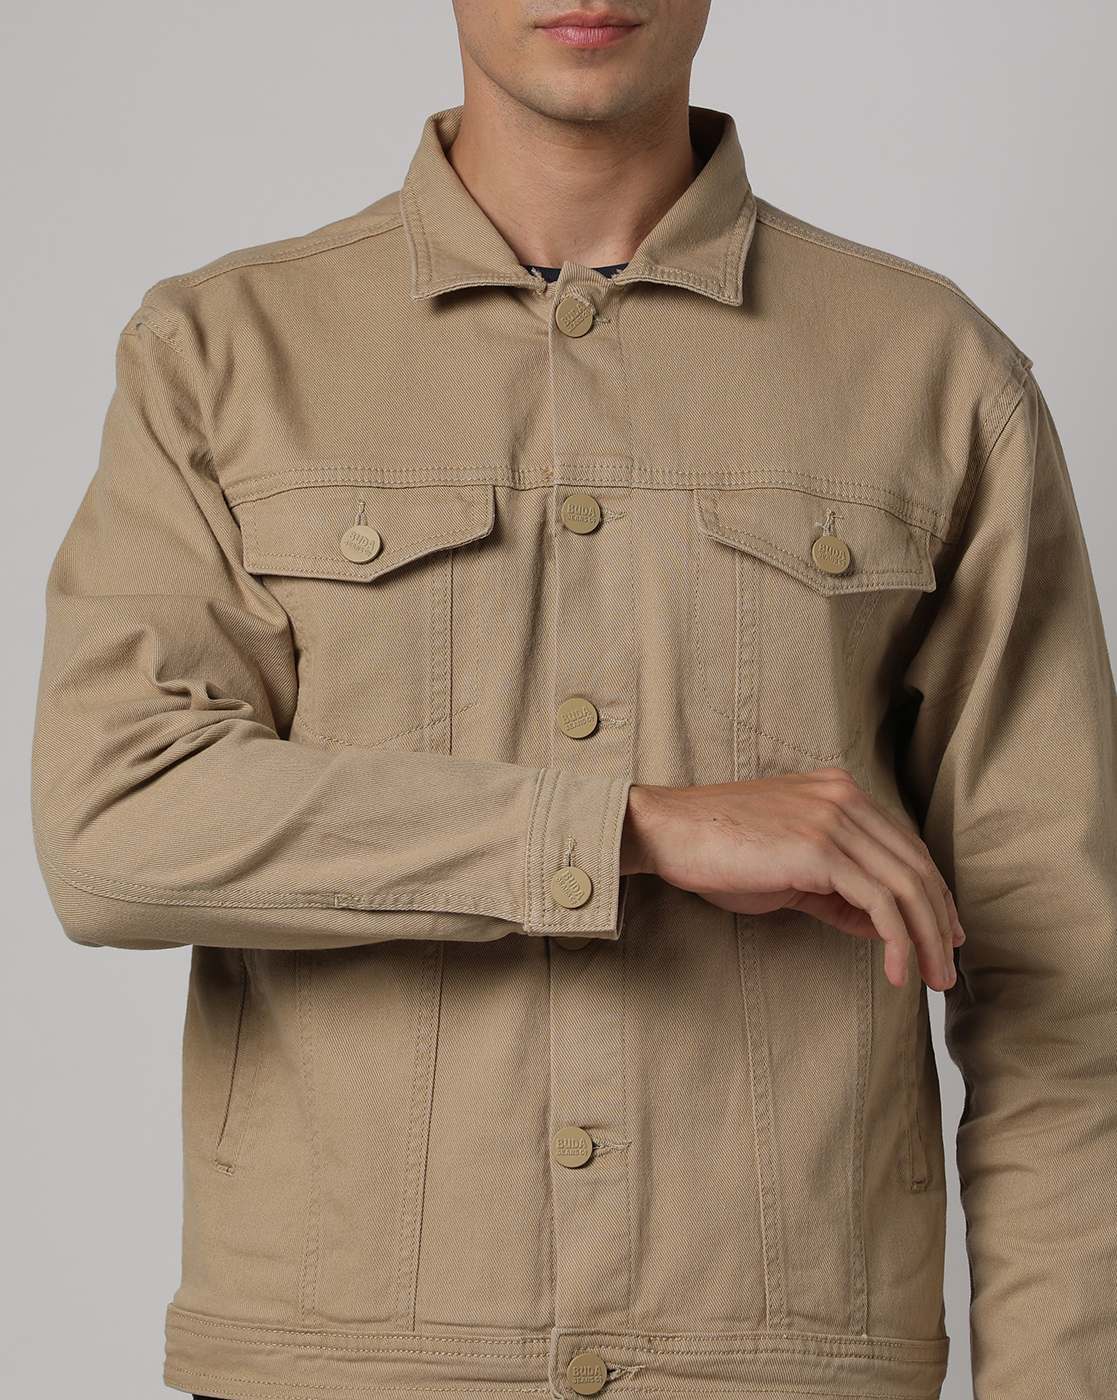 Men's Signature Donegal Woven Shirt, Long-Sleeve | Casual Button-Down Shirts  at L.L.Bean